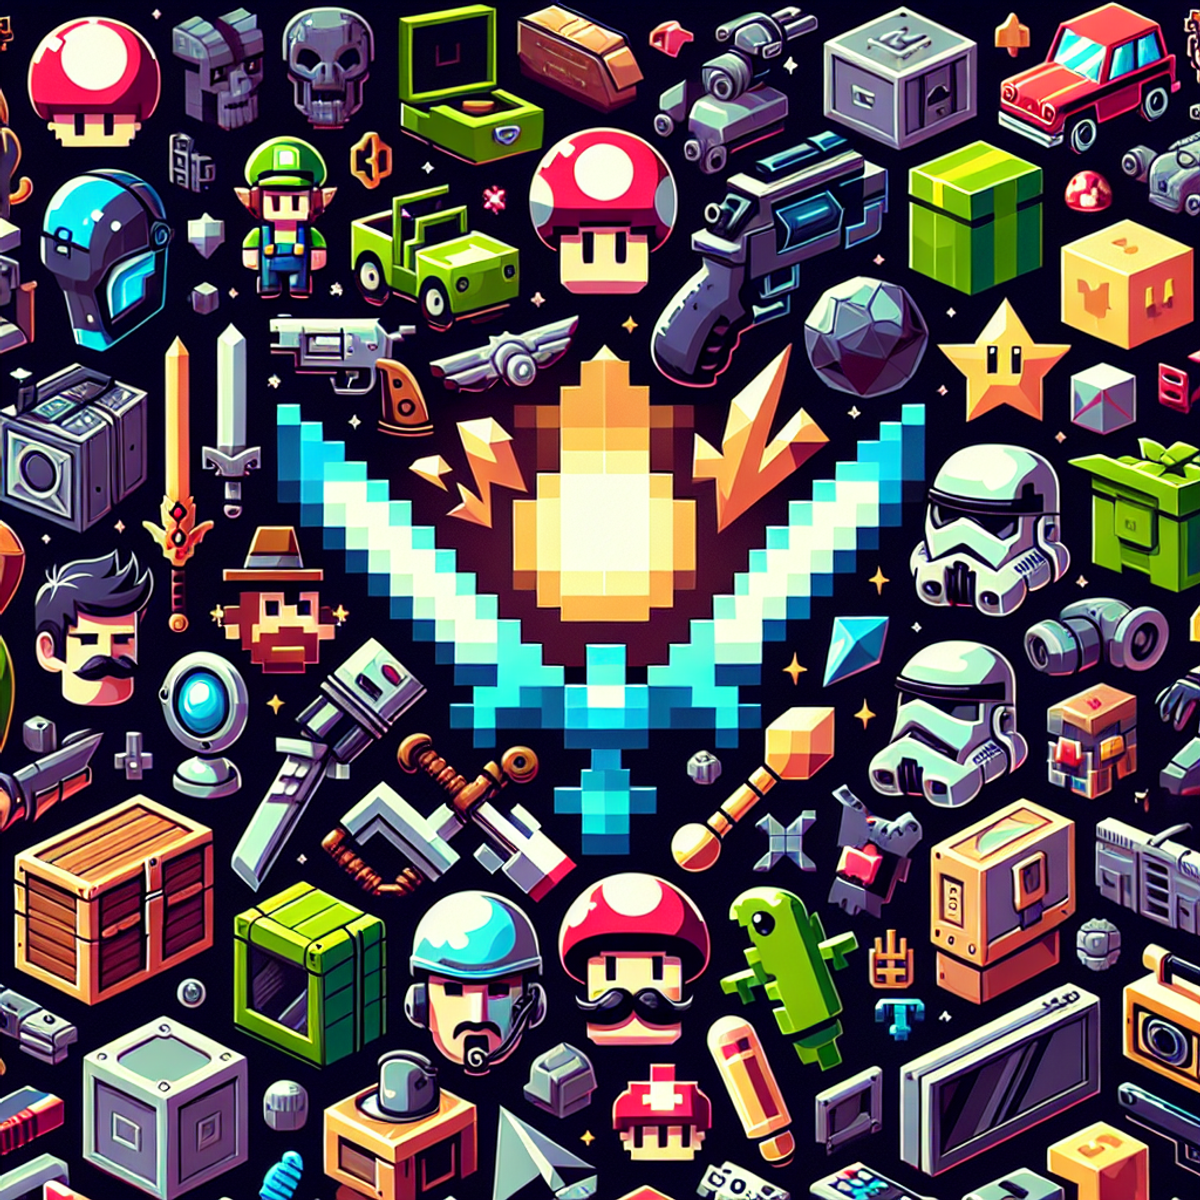 An image filled with a wide array of vivid and lively depictions of generic, visually distinct video game items and representations. The symbols vary from items like a pixelated sword, a 3D model of a treasure chest, to an 8-bit power-up mushroom. Also, the image includes generic game characters such as a plucky adventurer with a green cap, a sci-fi soldier in futuristic armor, and a classic blocky character with a mustache, each adding their unique touch to this representation of gaming culture. The array of characters and items should demonstrate the thrill and multifaceted nature of video game culture.